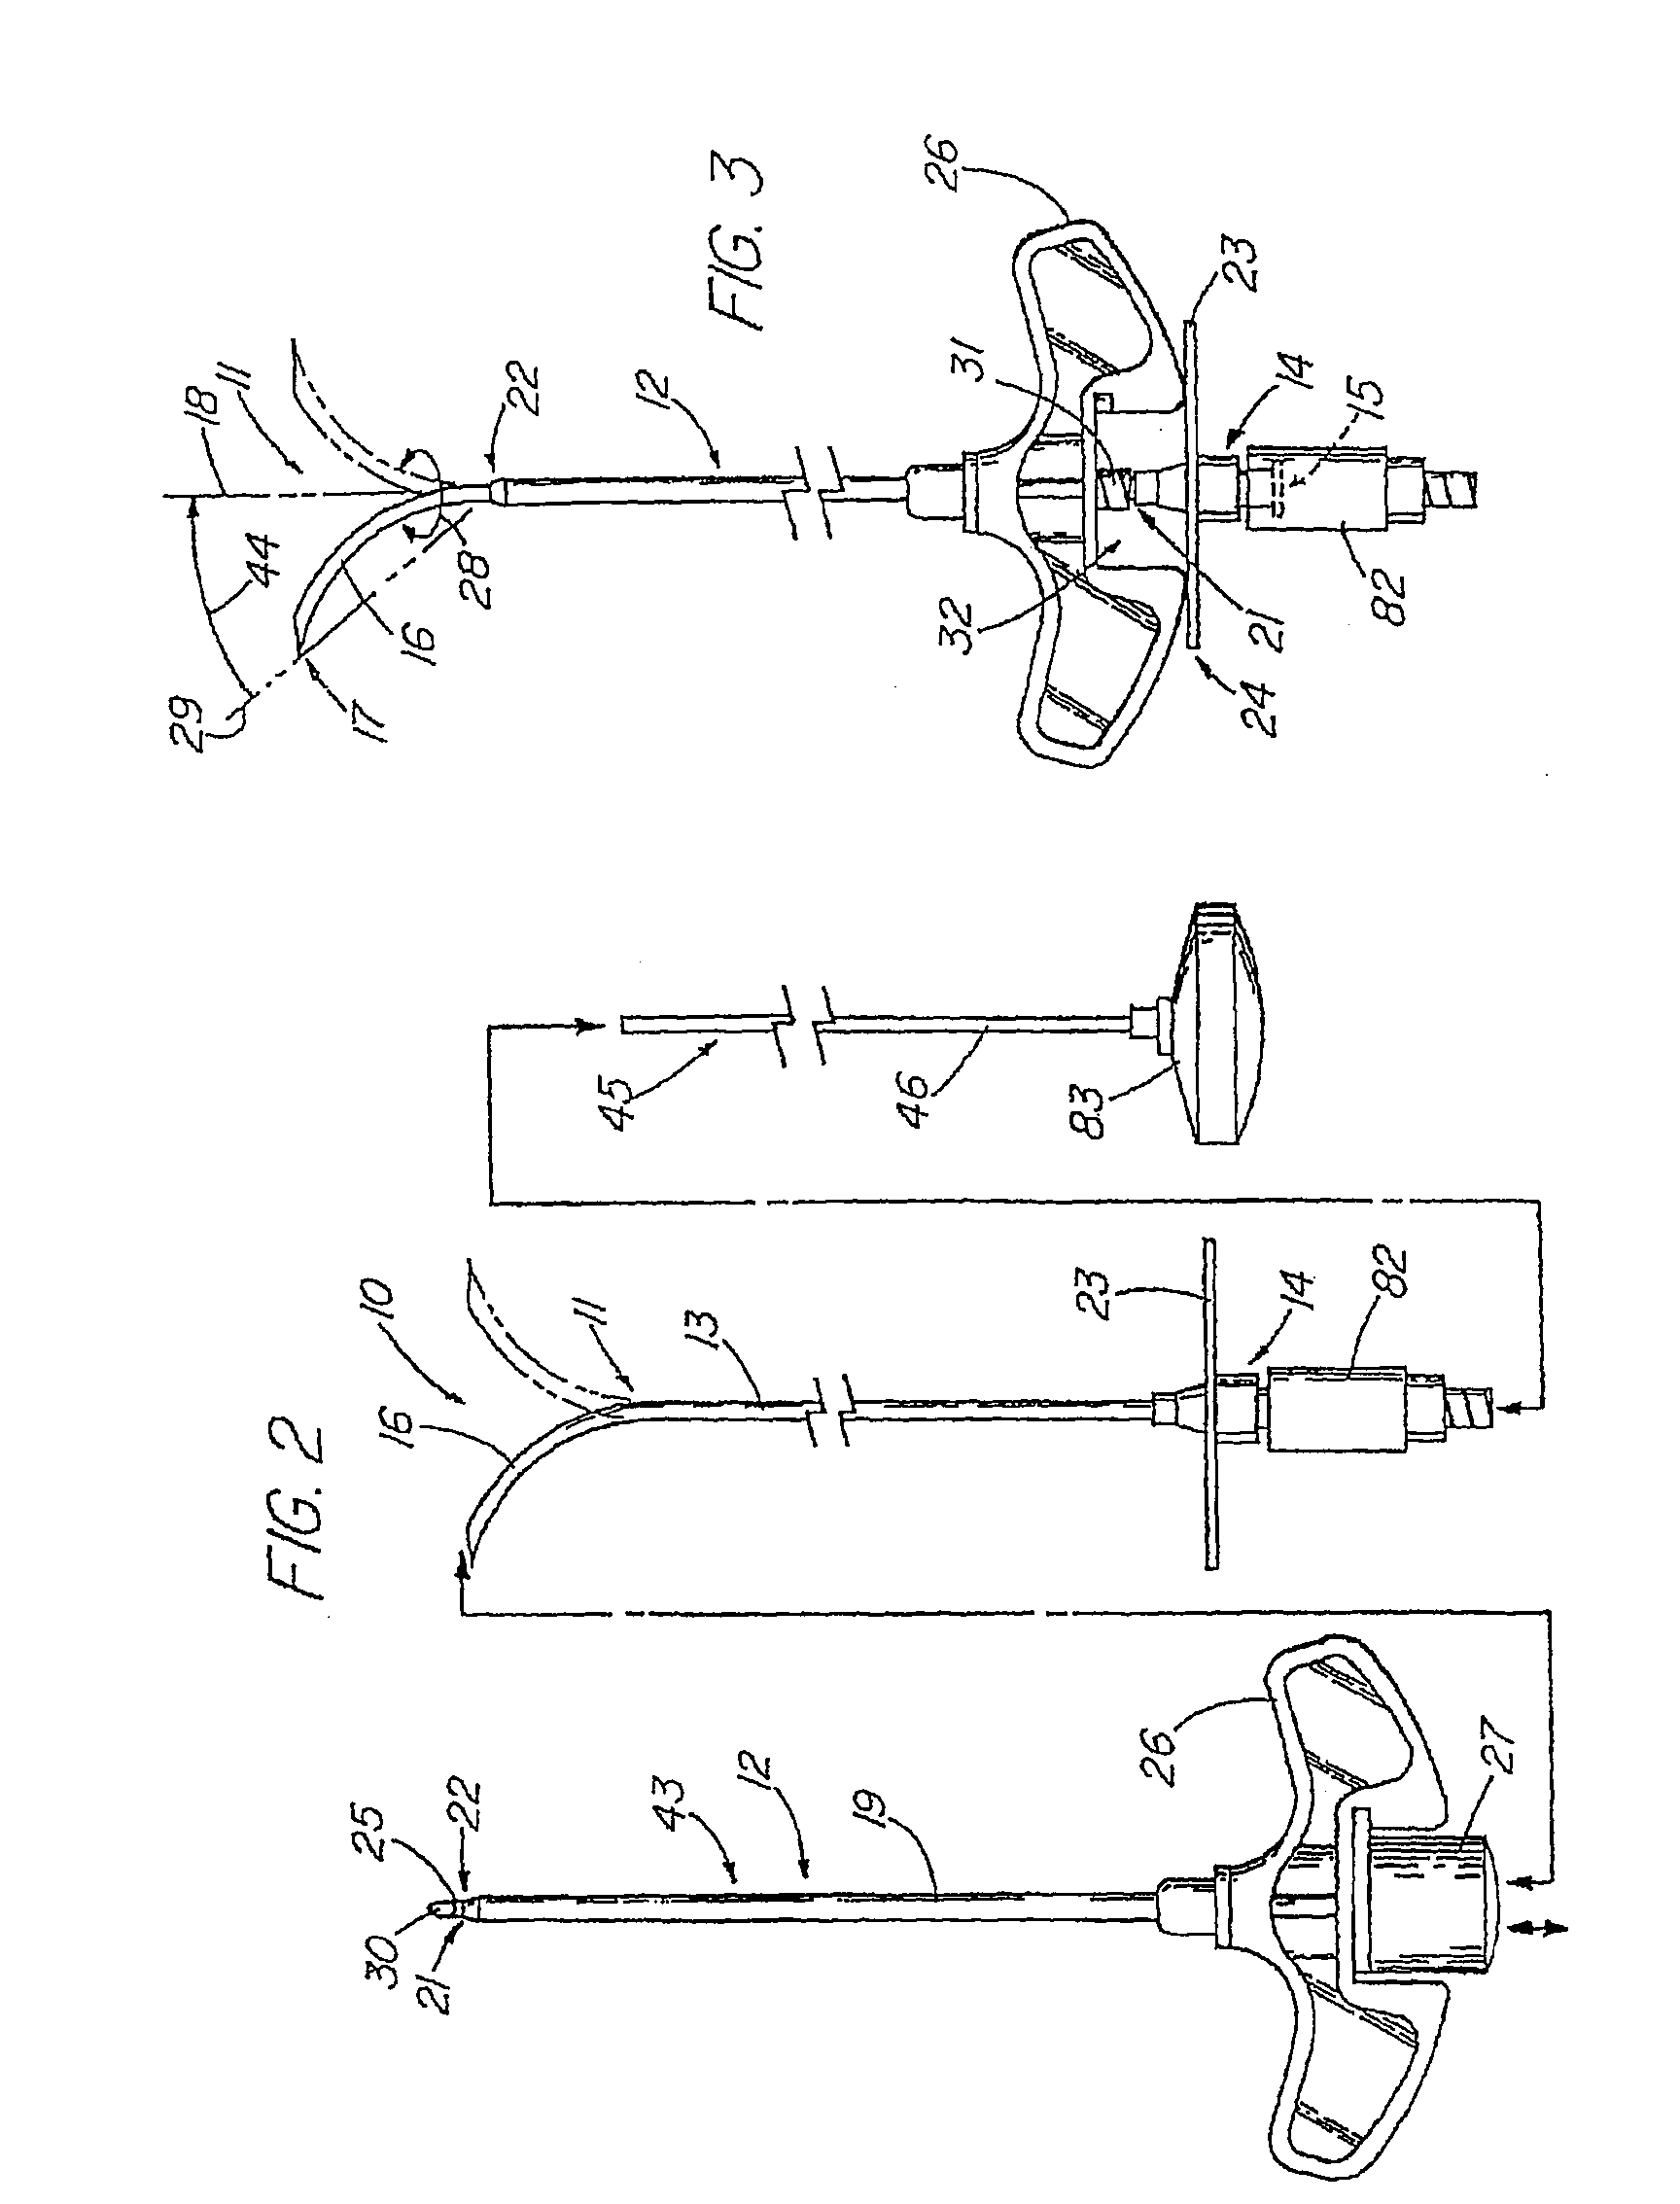 Hollow curved superelastic medical needle and method